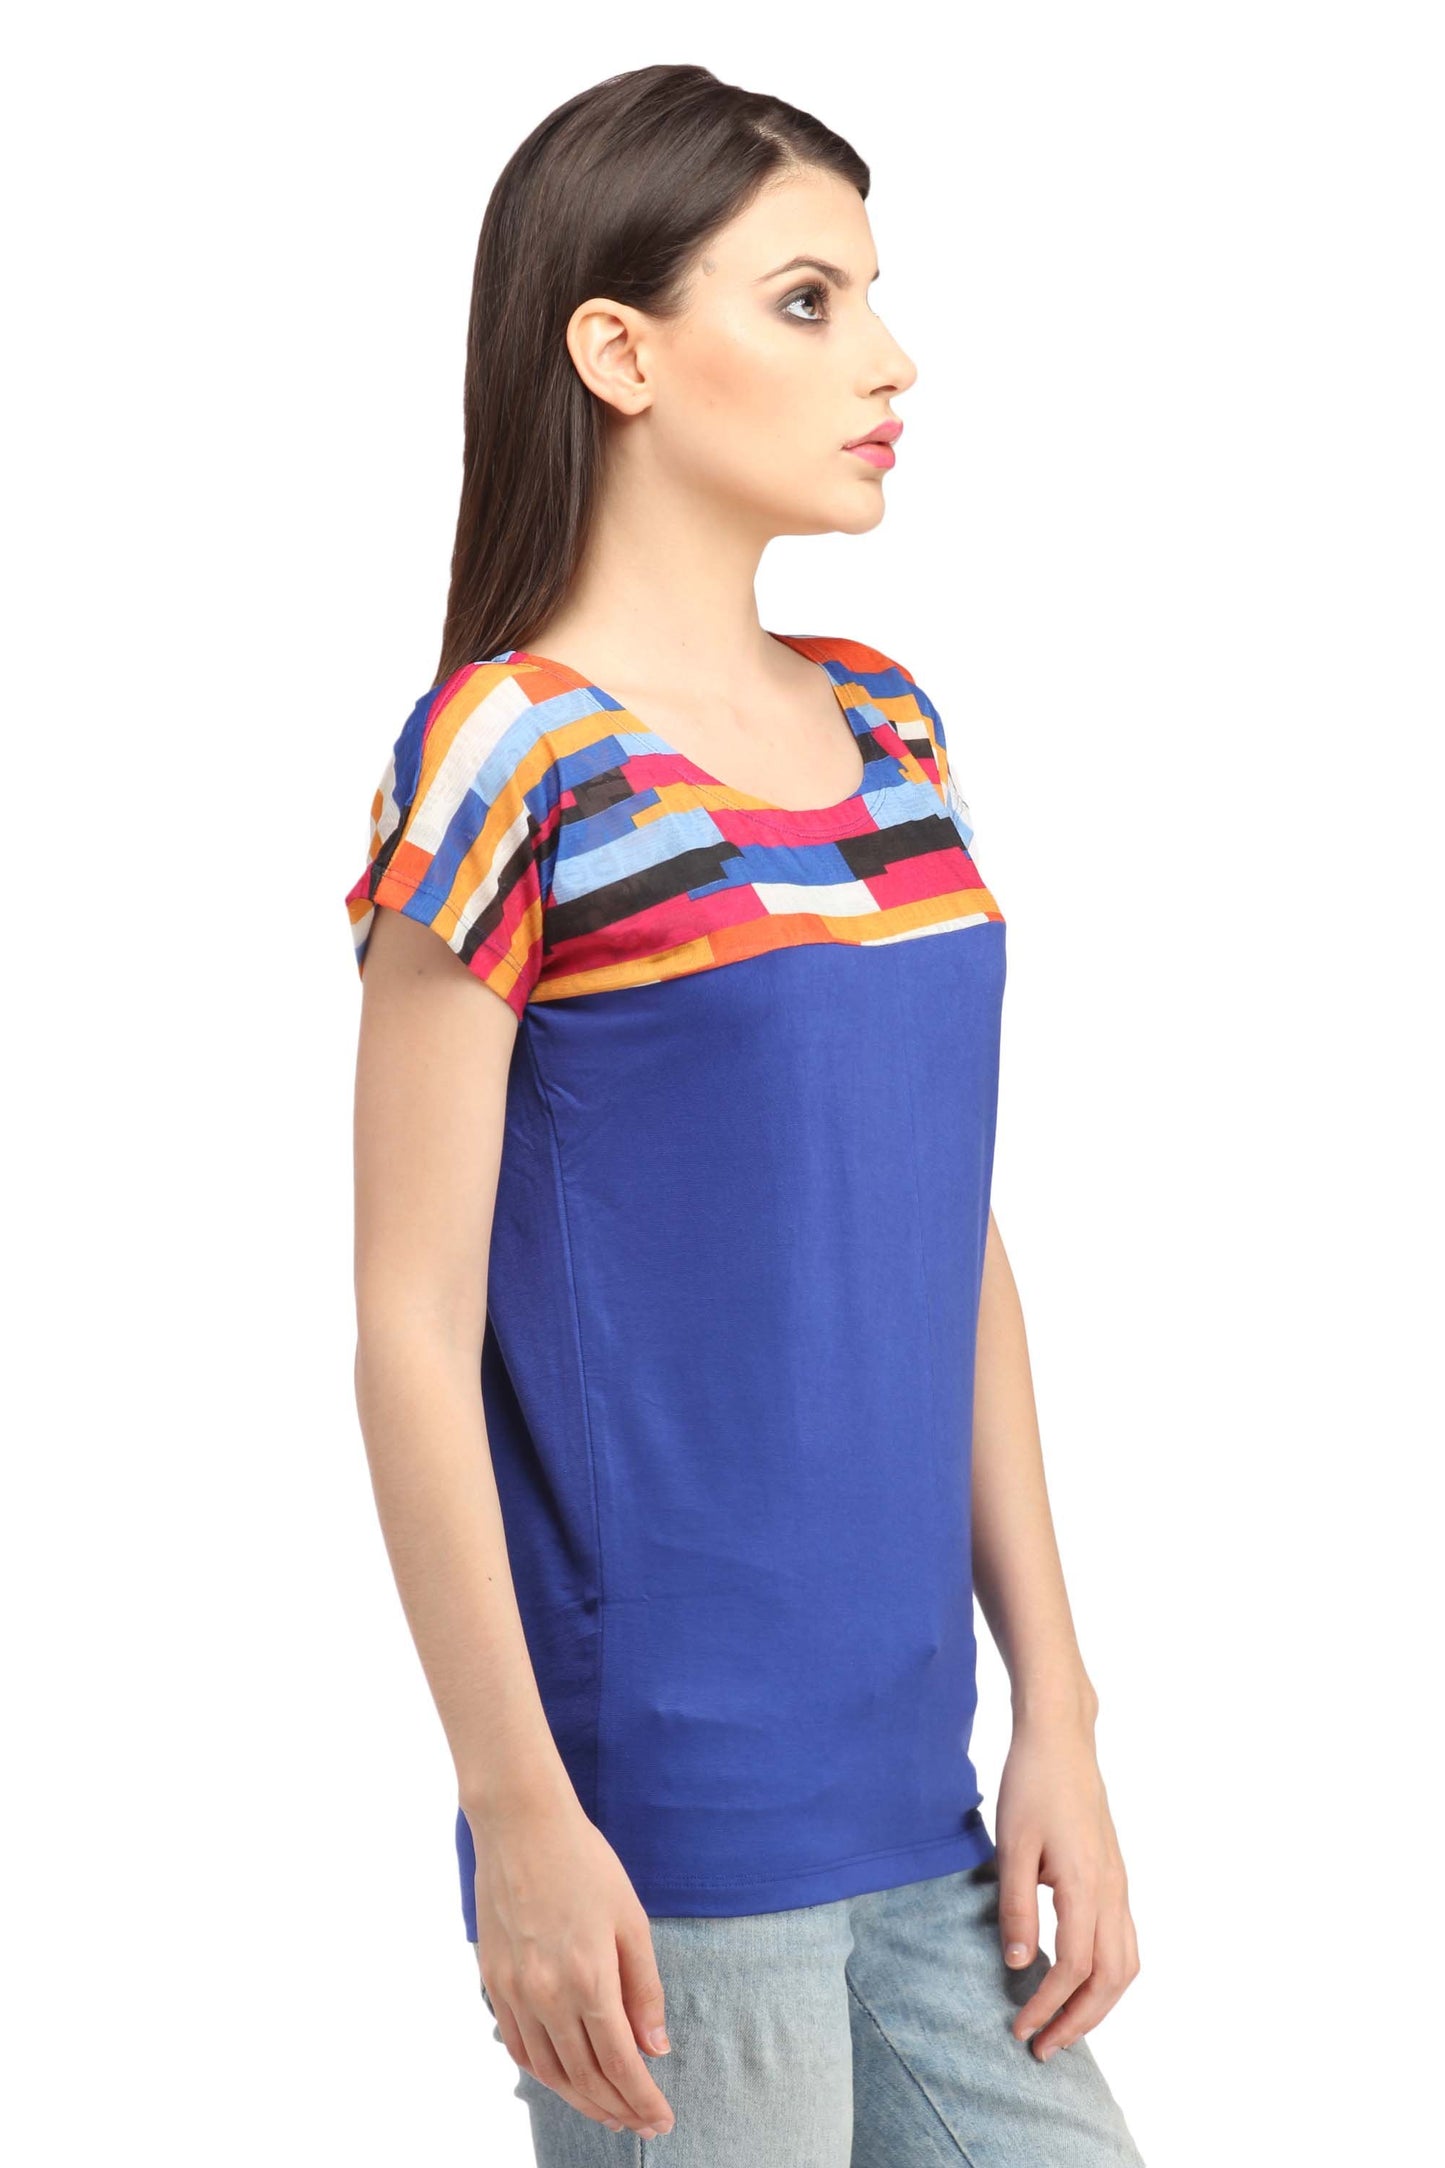 Cation Blue Top